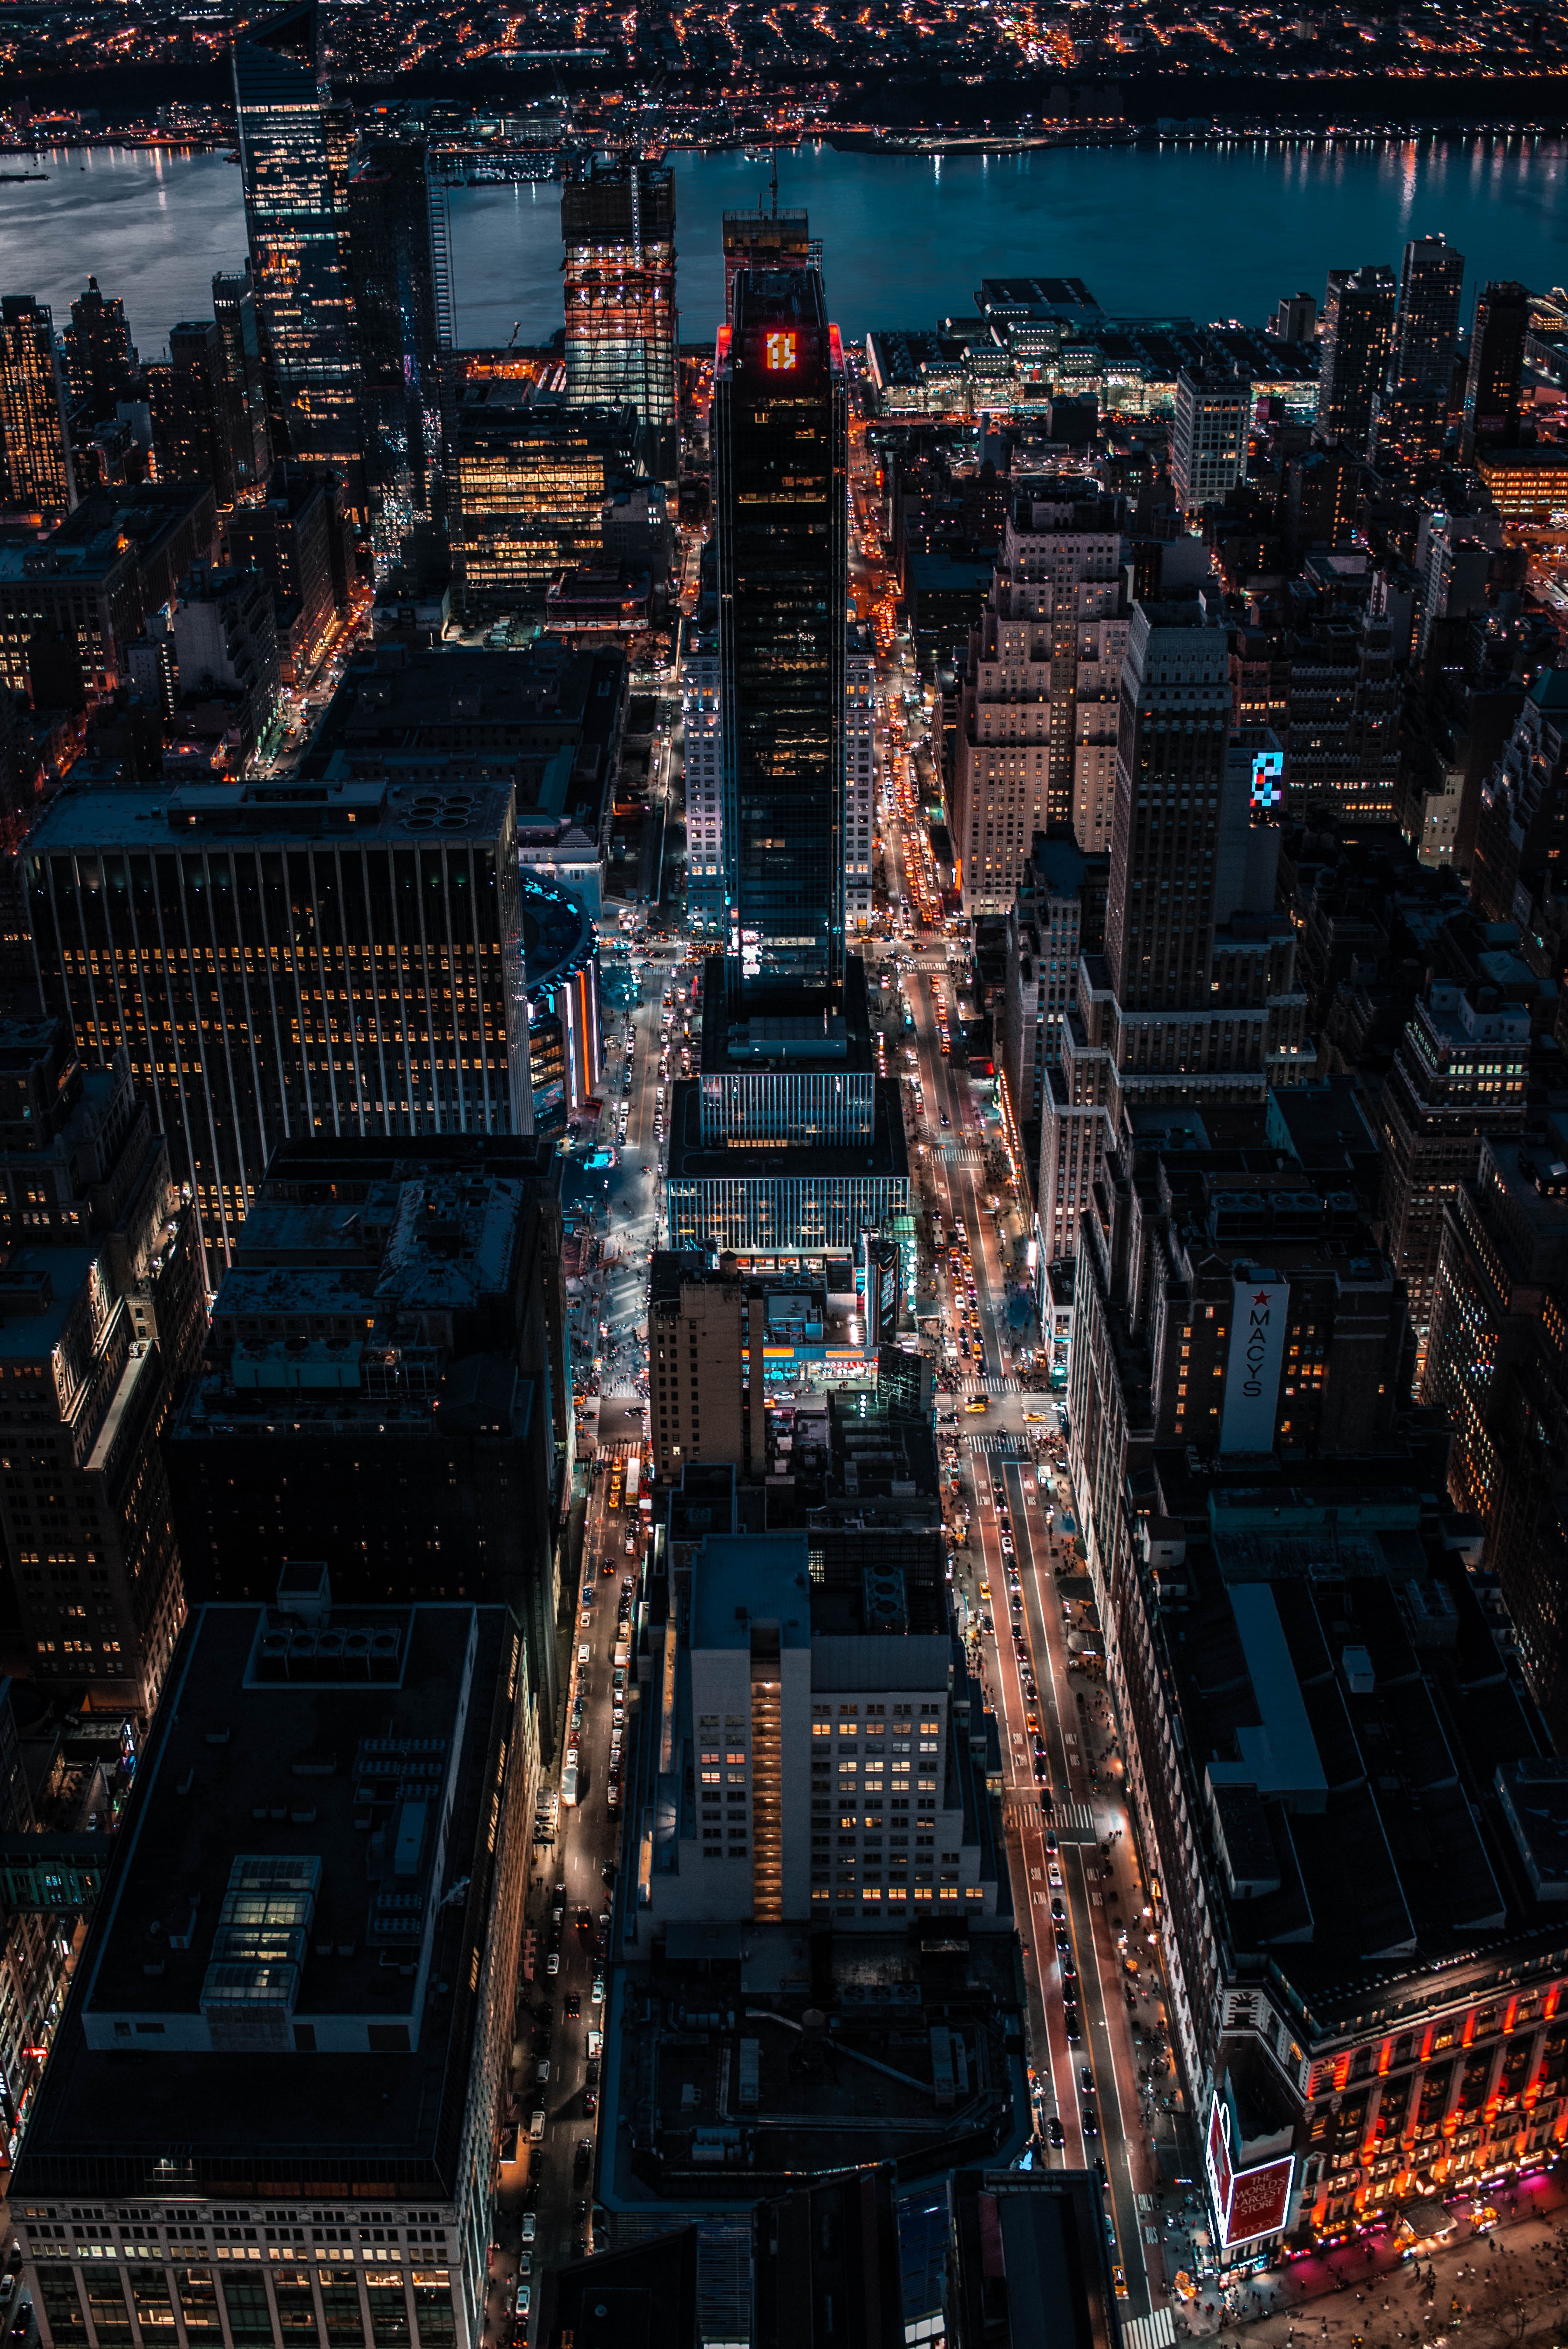 city lights, megapolis, megalopolis, view from above, cities, building, night city, skyscrapers Full HD